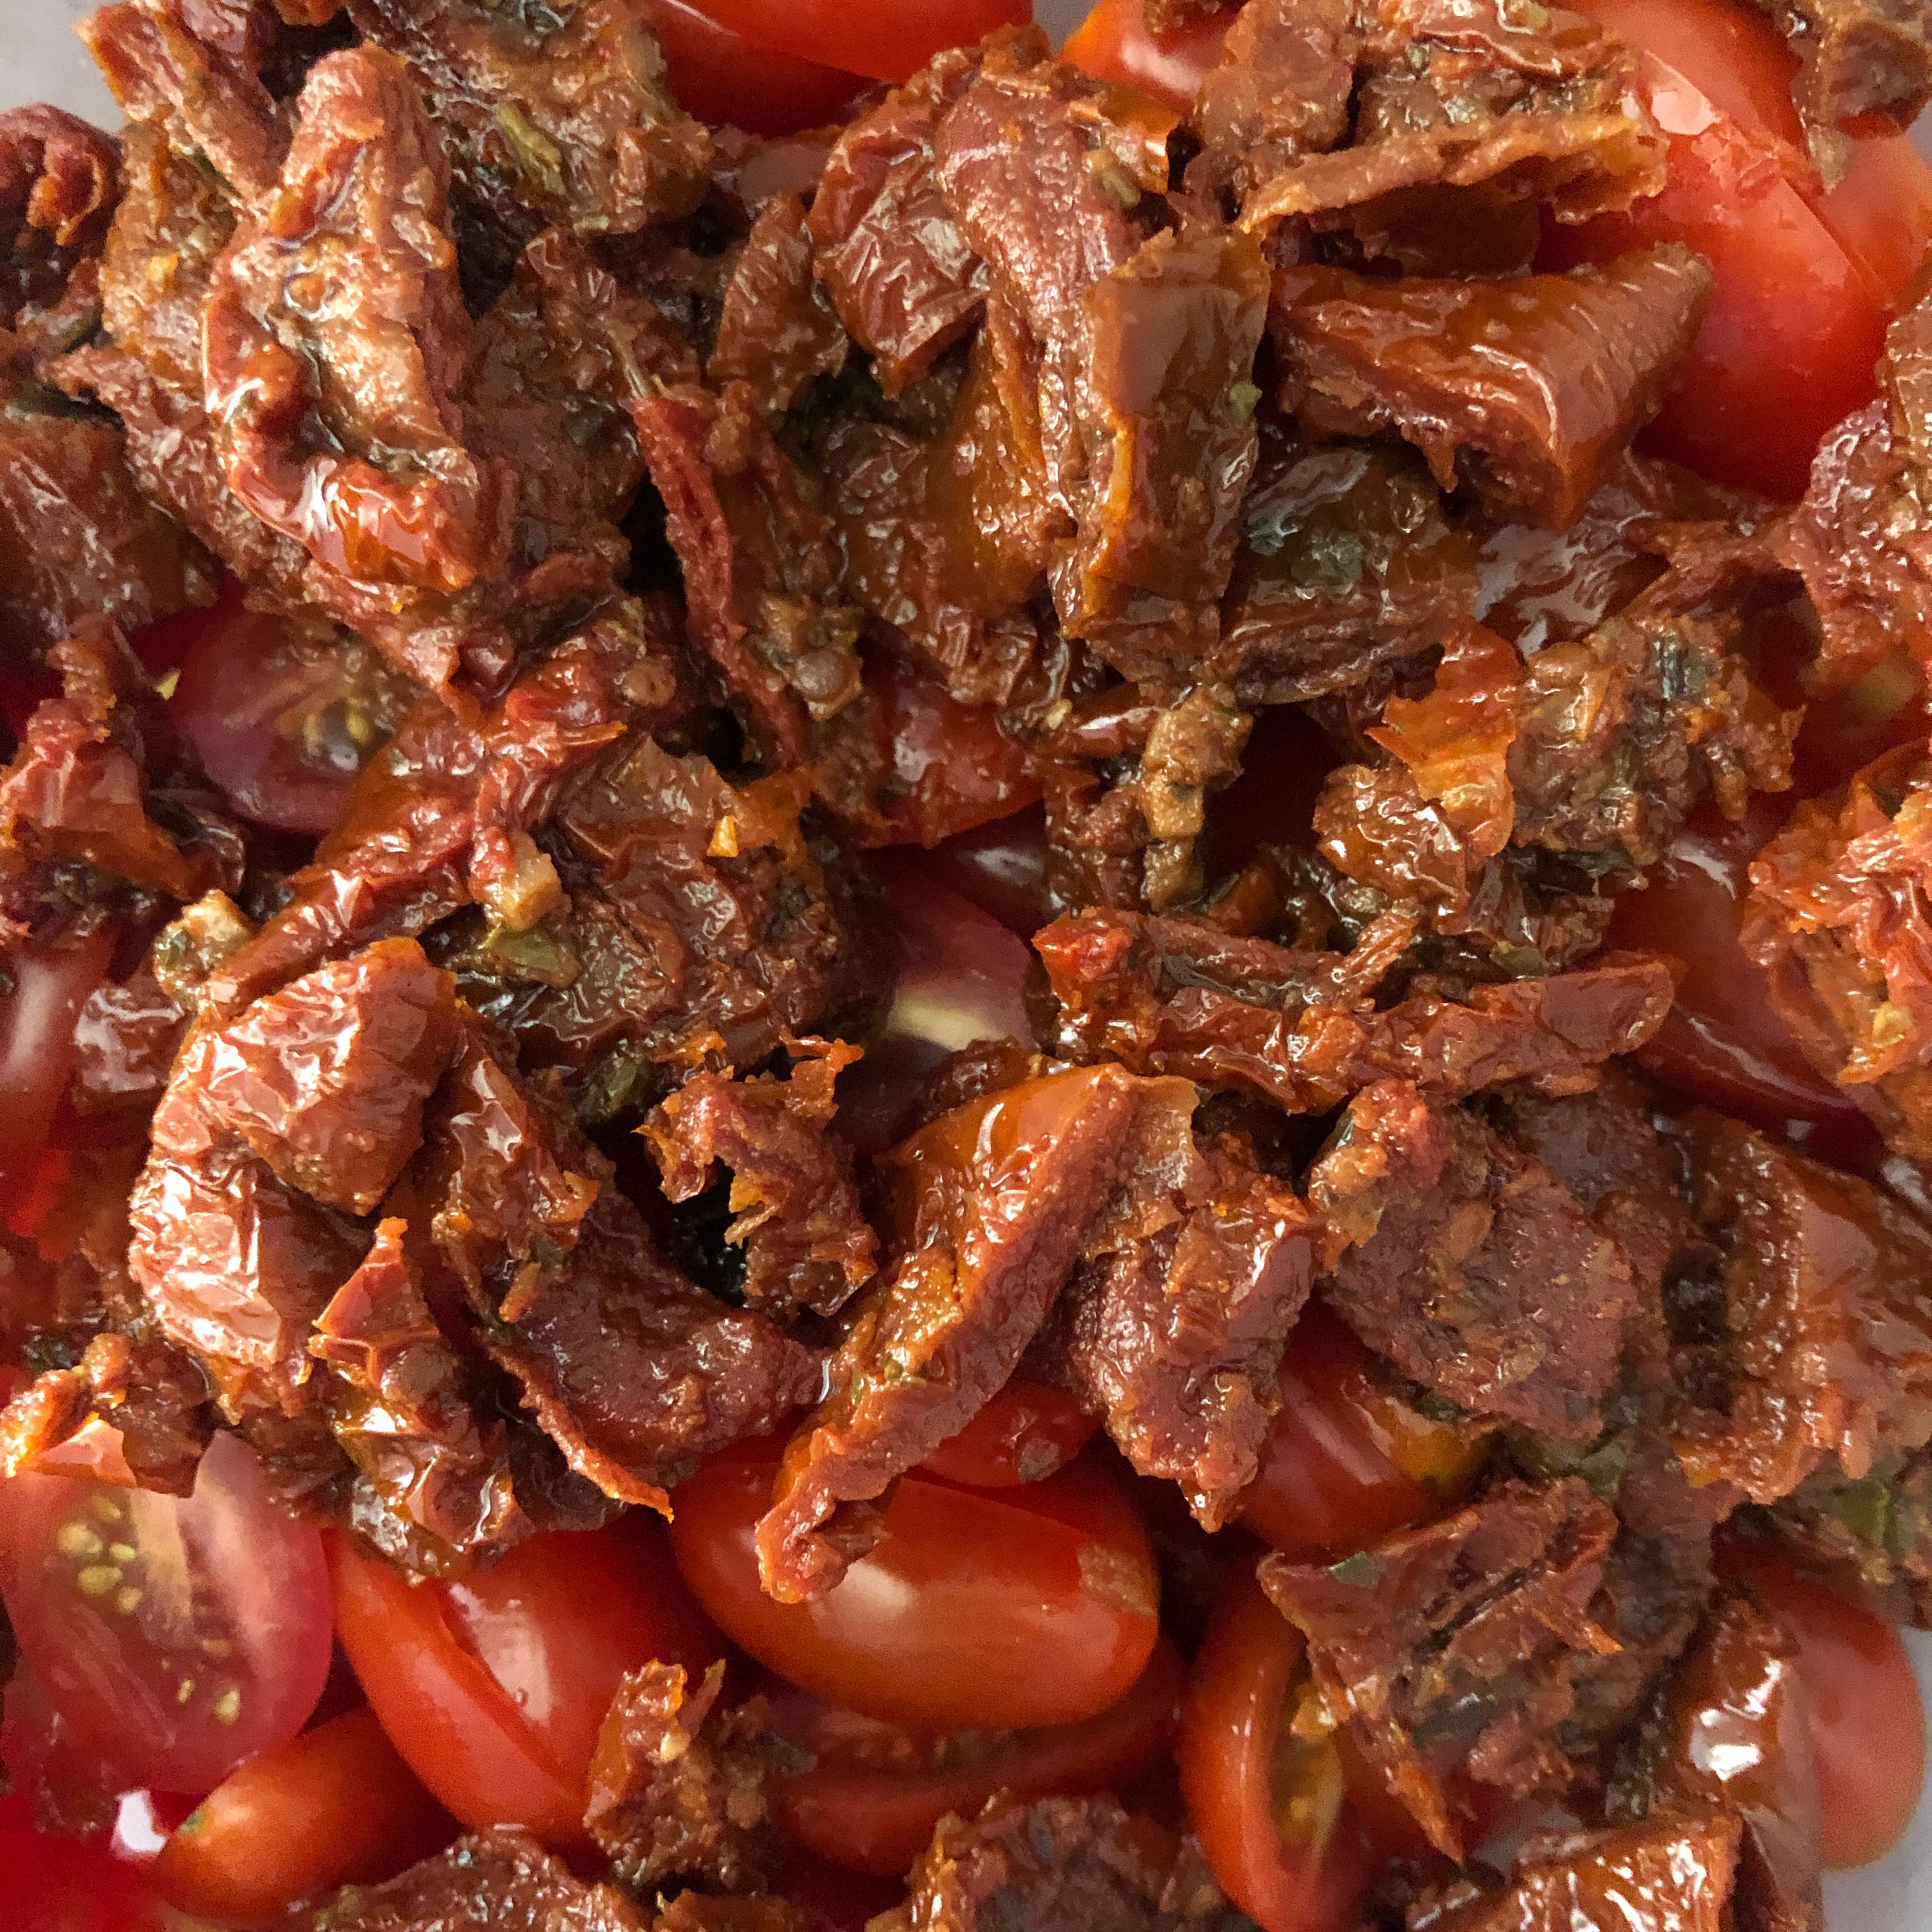 Cut dried tomatoes and paprika into small pieces and add to bowl.